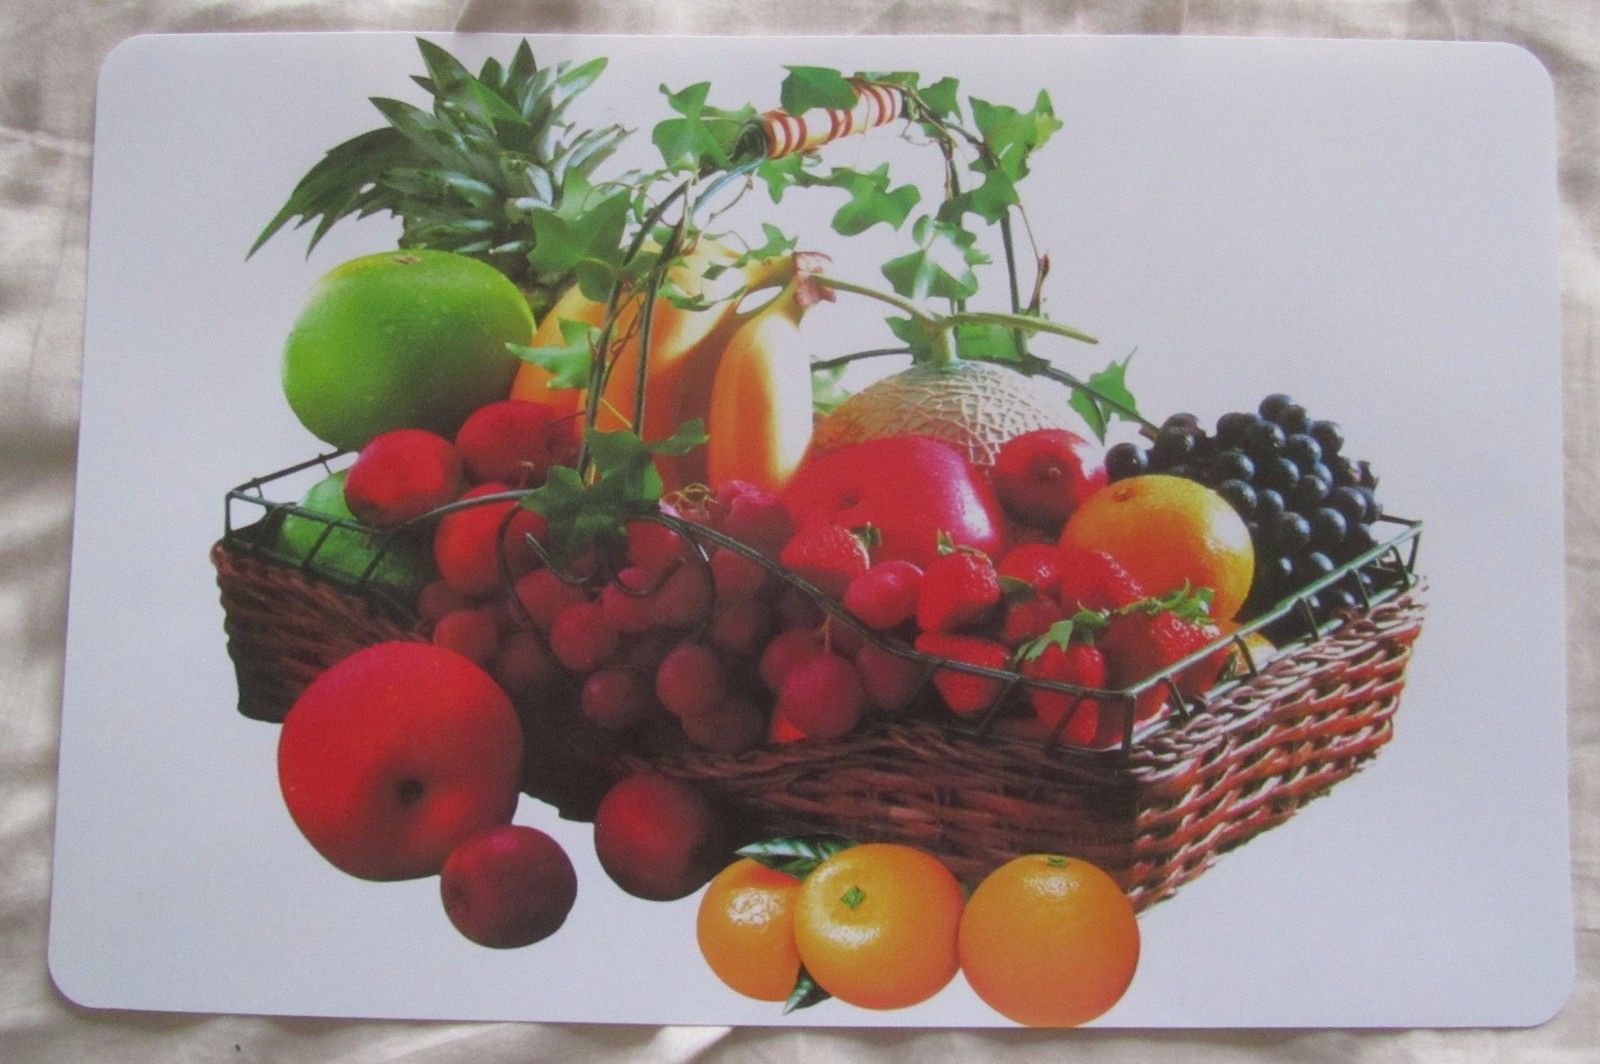 Primary image for 4pc Non Clear Thin Plastic Set: 2 PLACEMATS & 2 COASTERS,BASKET OF FRUITS,Mirtex